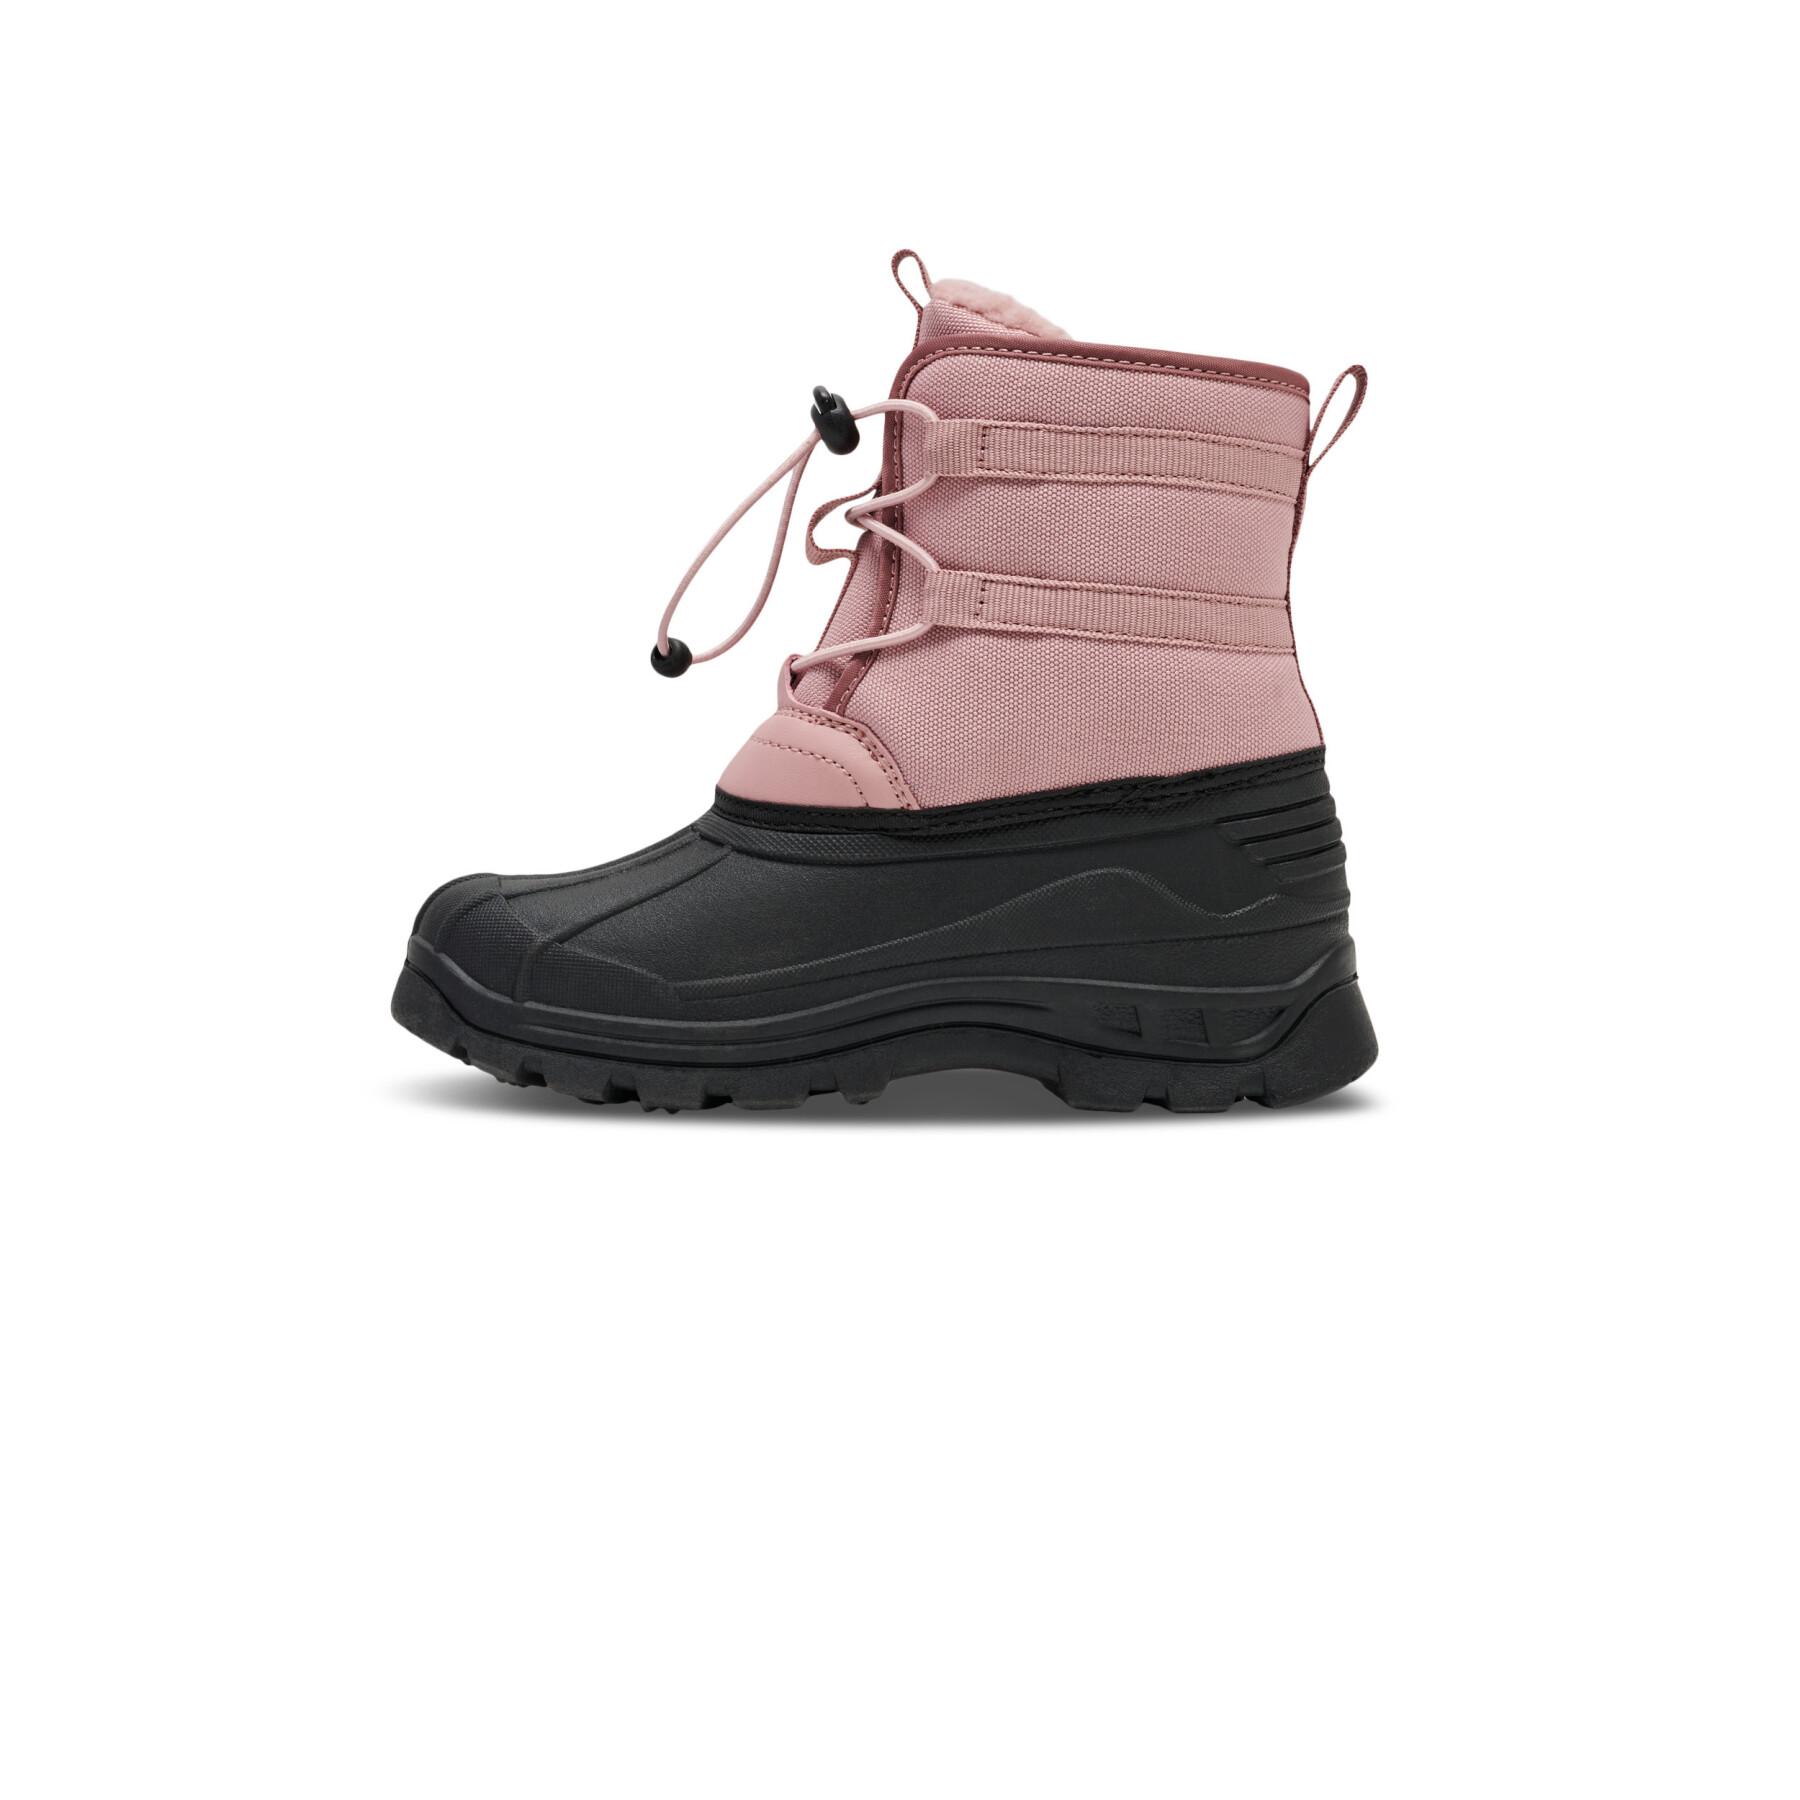 Children's boots Hummel Icicle Low